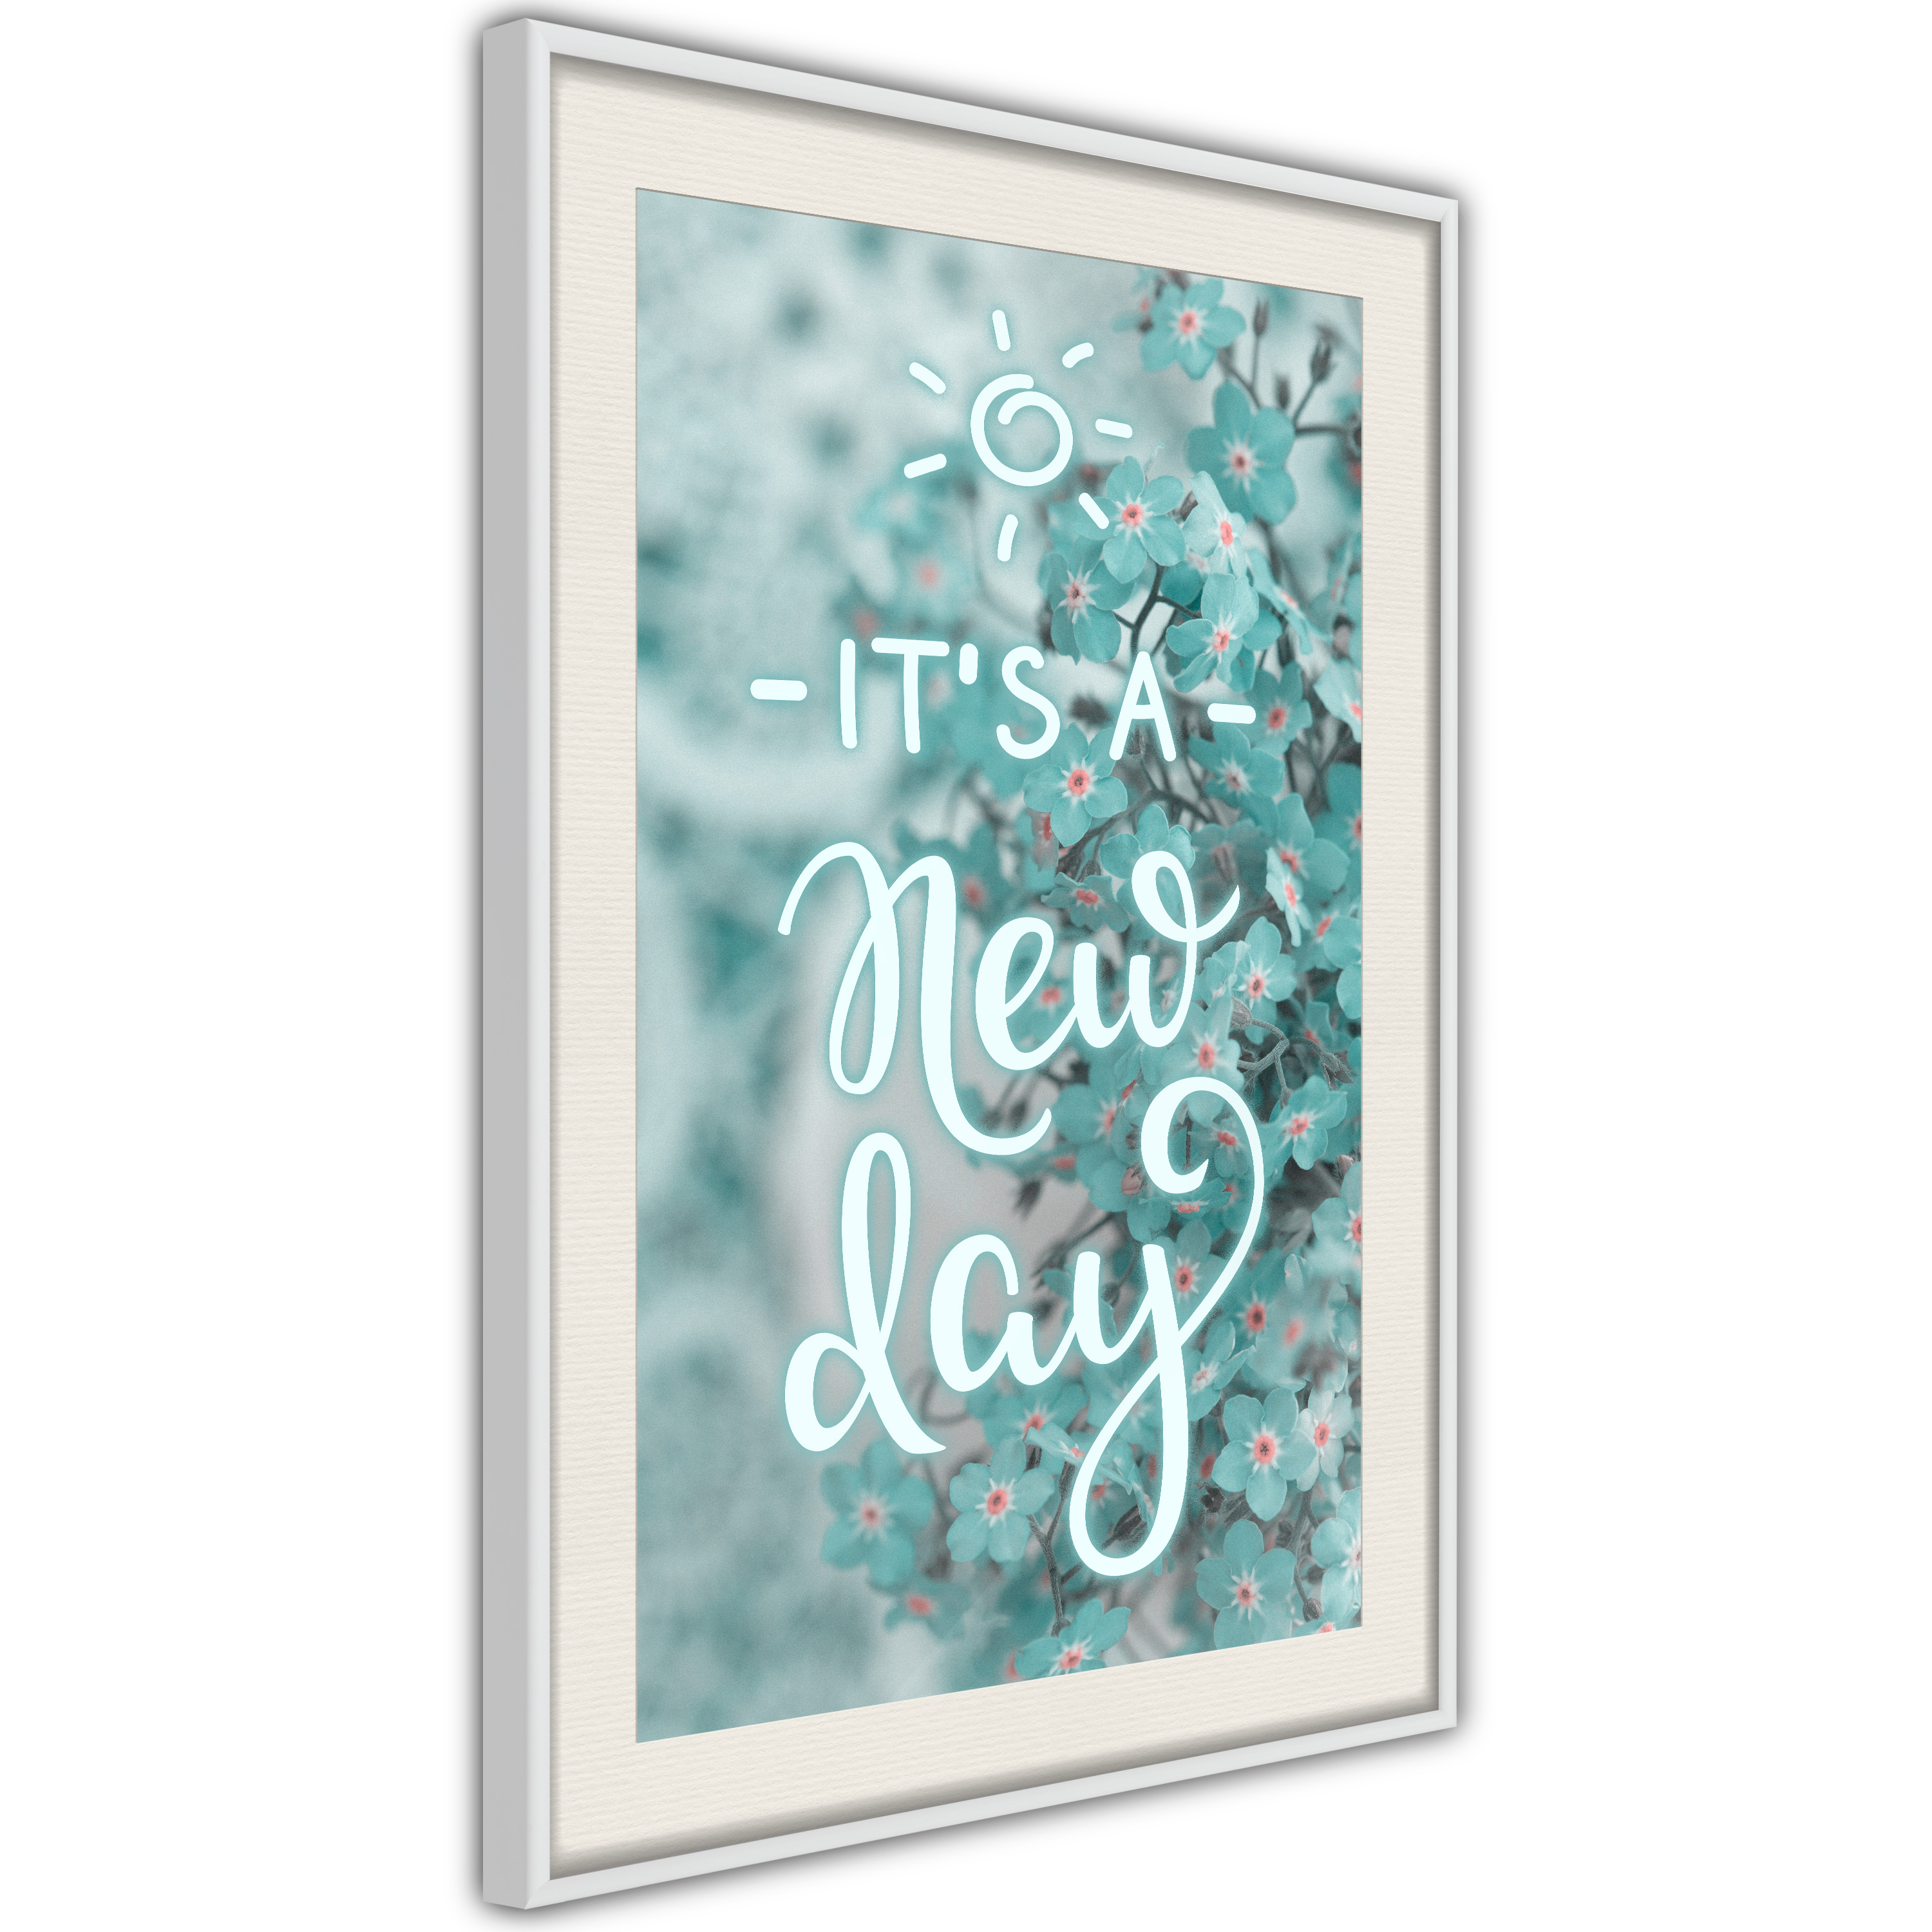 Poster - New Day - 30x45